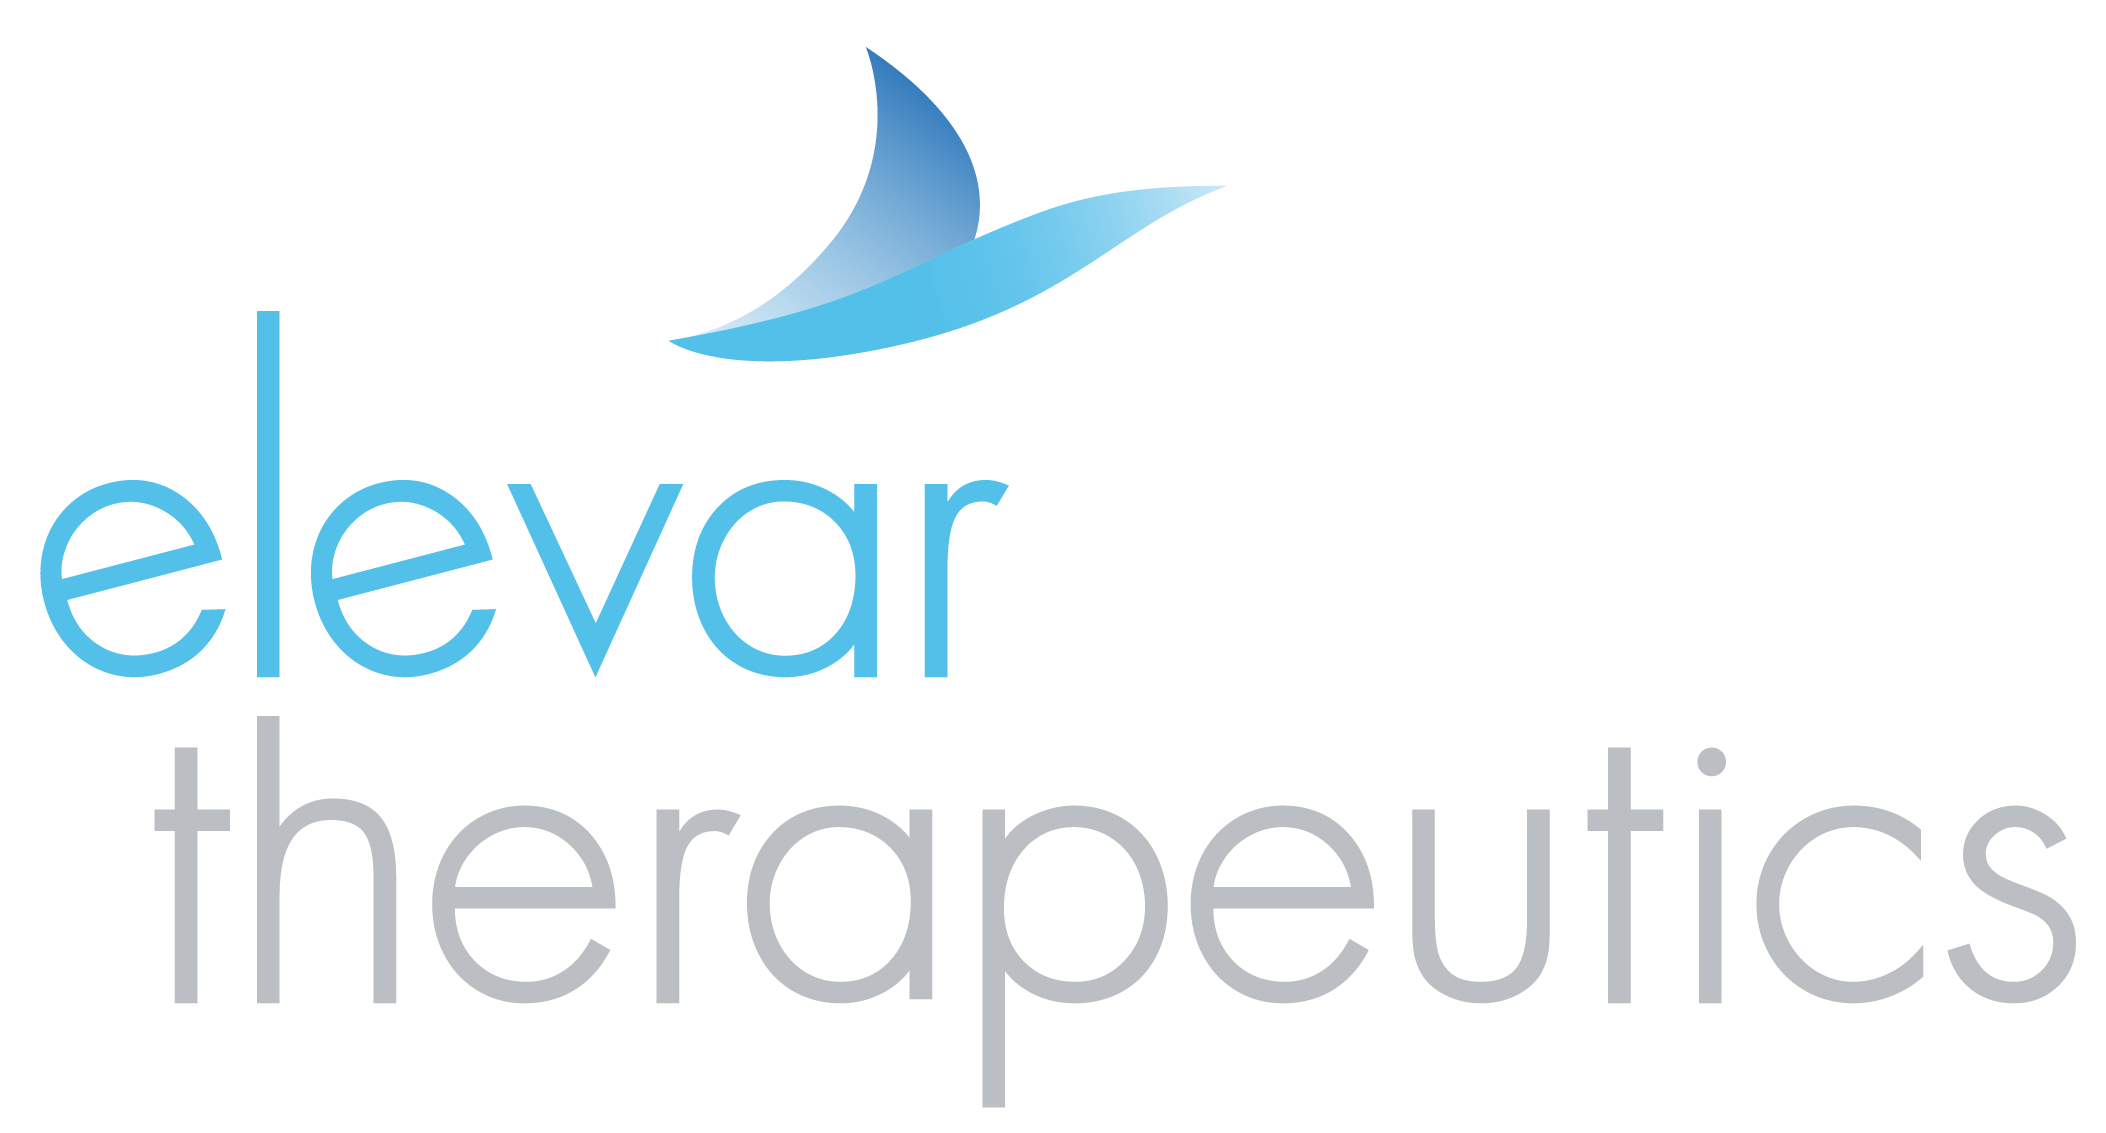 Elevar Therapeutics Announces FDA Acceptance for Filing of New Drug Application for Rivoceranib in Combination with Camrelizumab as a First-line Treatment for Unresectable Hepatocellular Carcinoma